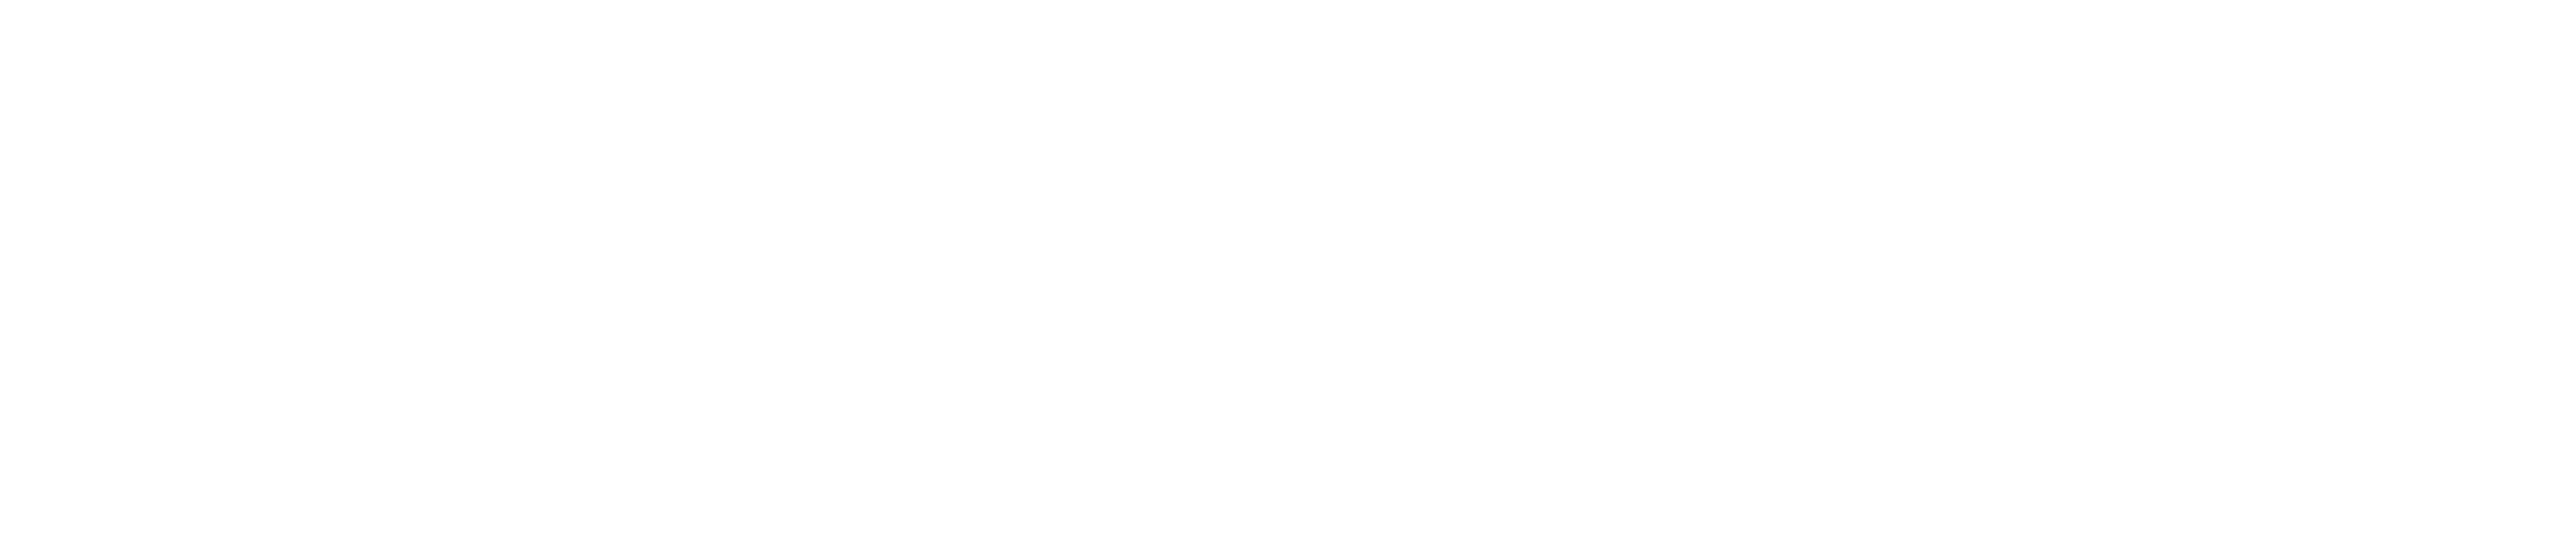 Integrated Solutions & Services's Logo